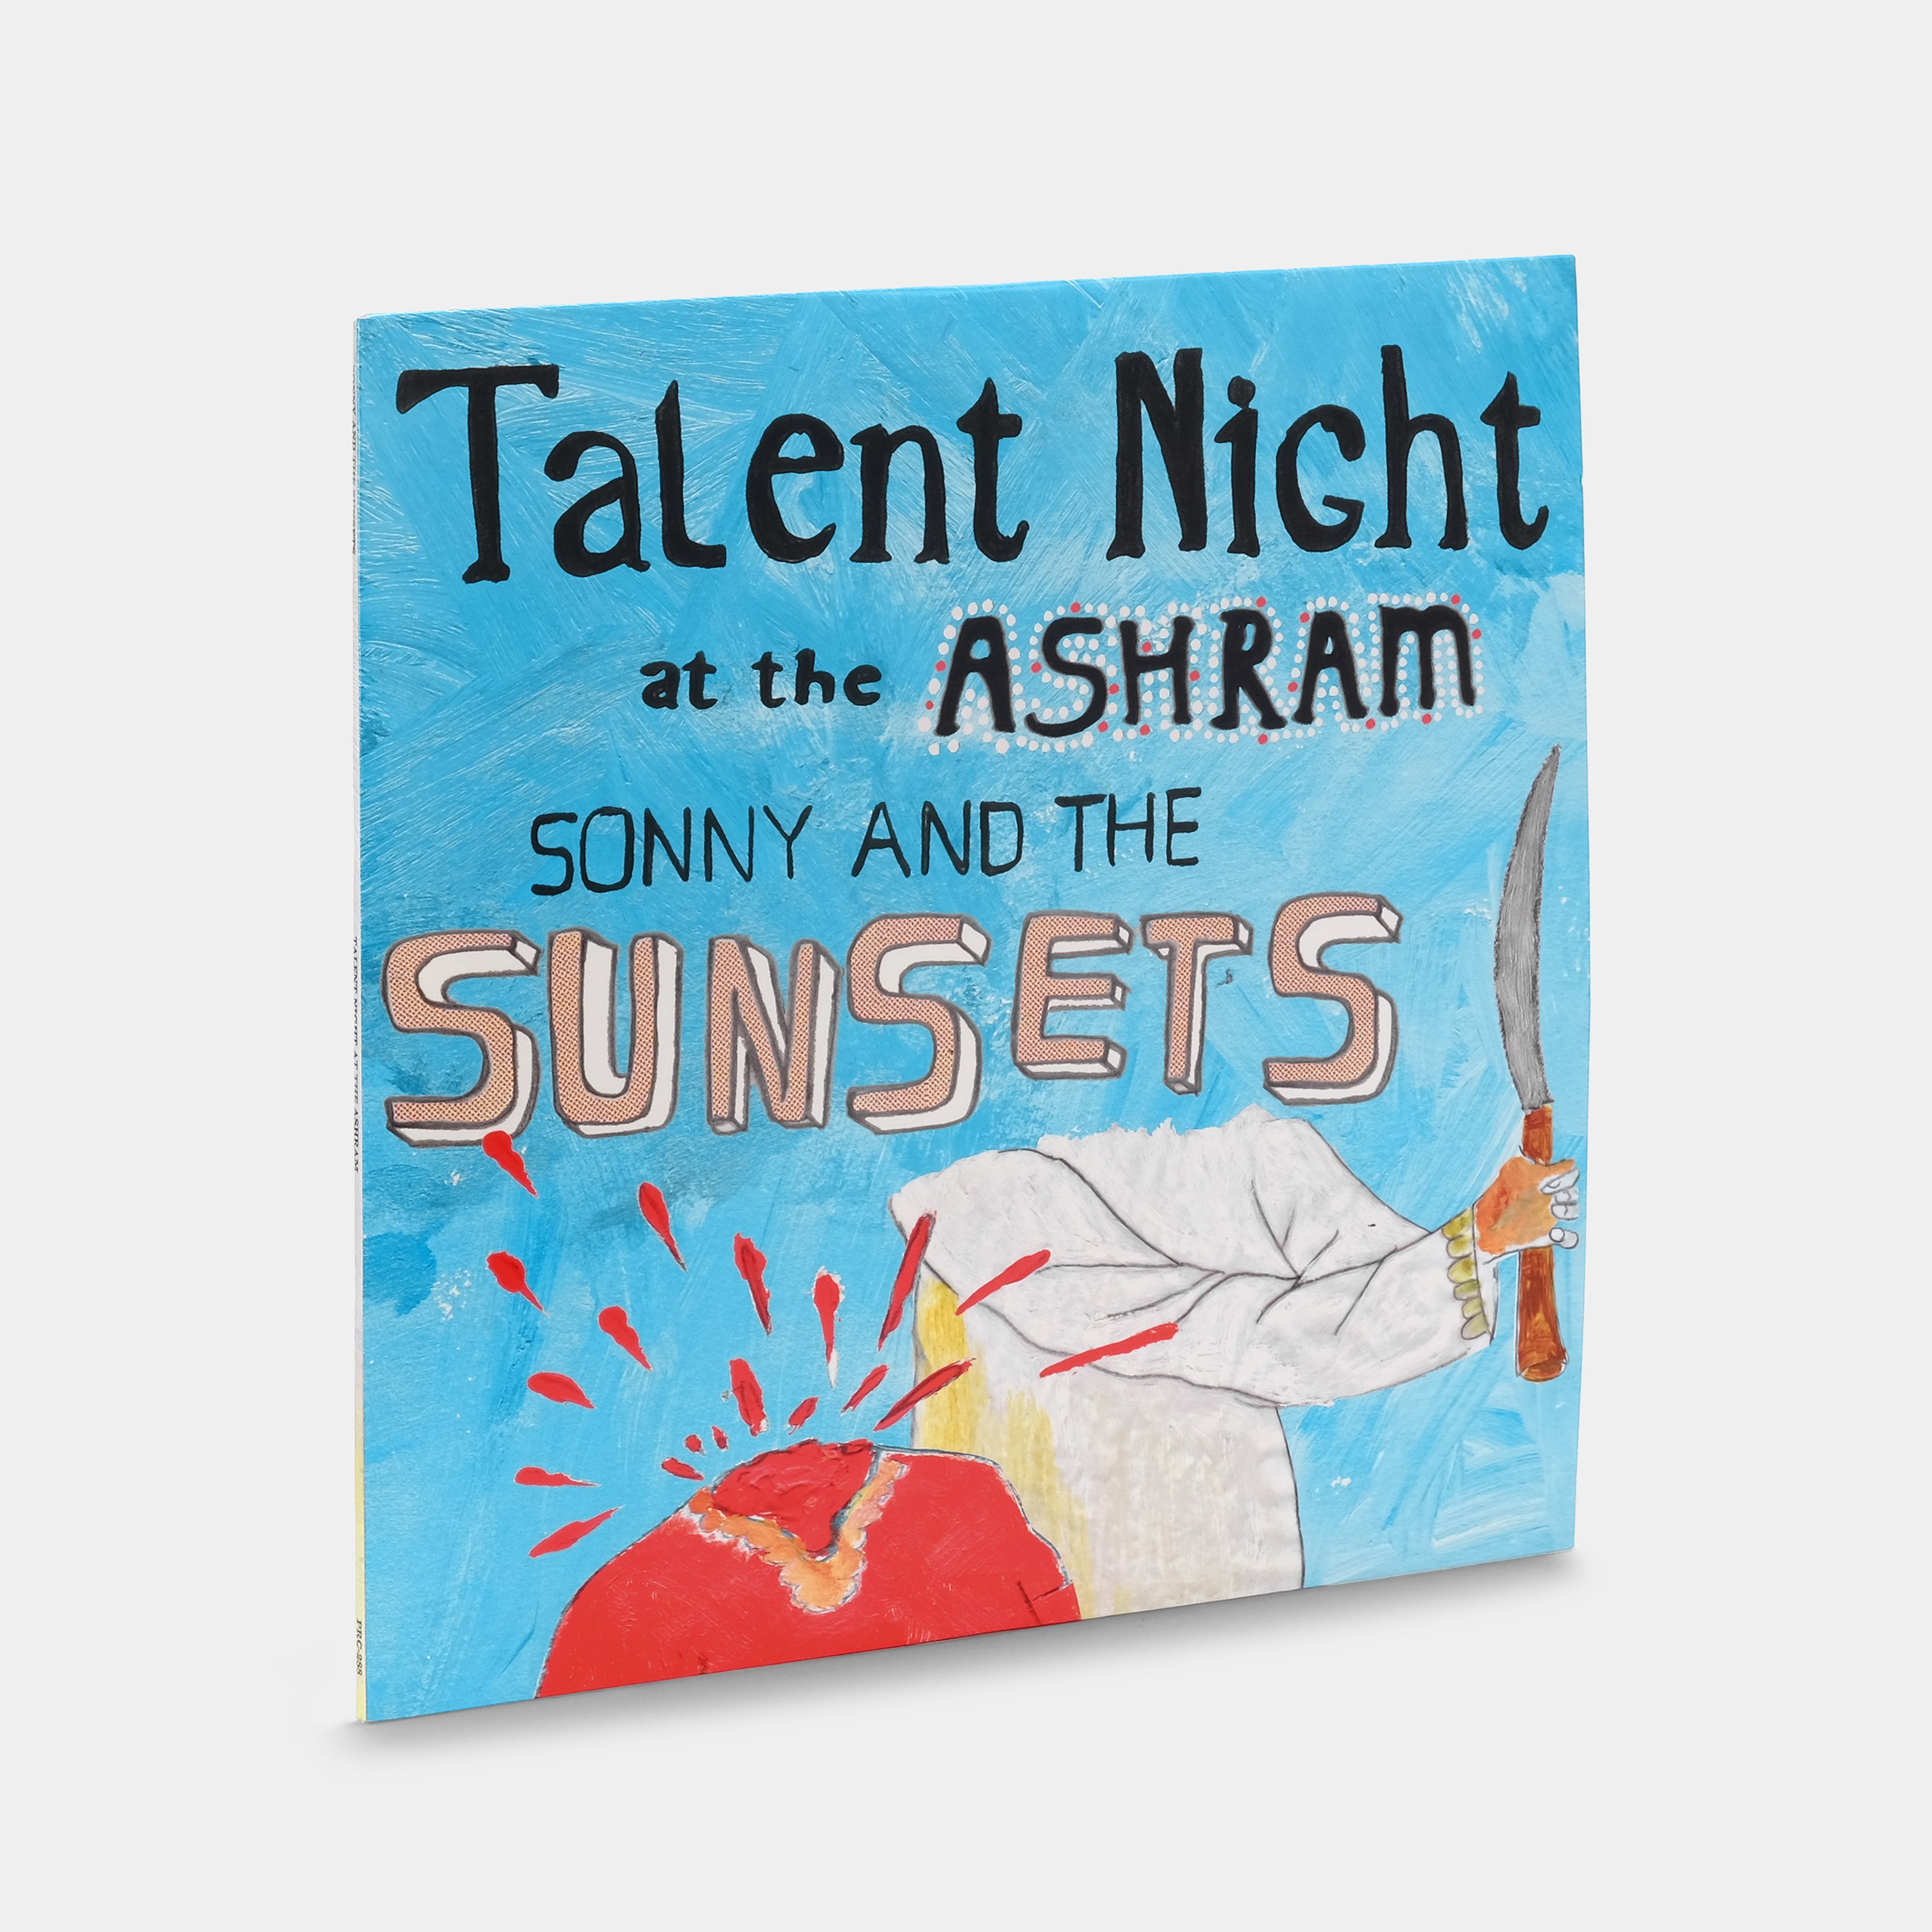 Sonny And The Sunsets - Talent Night At The Ashram LP Red Vinyl Record